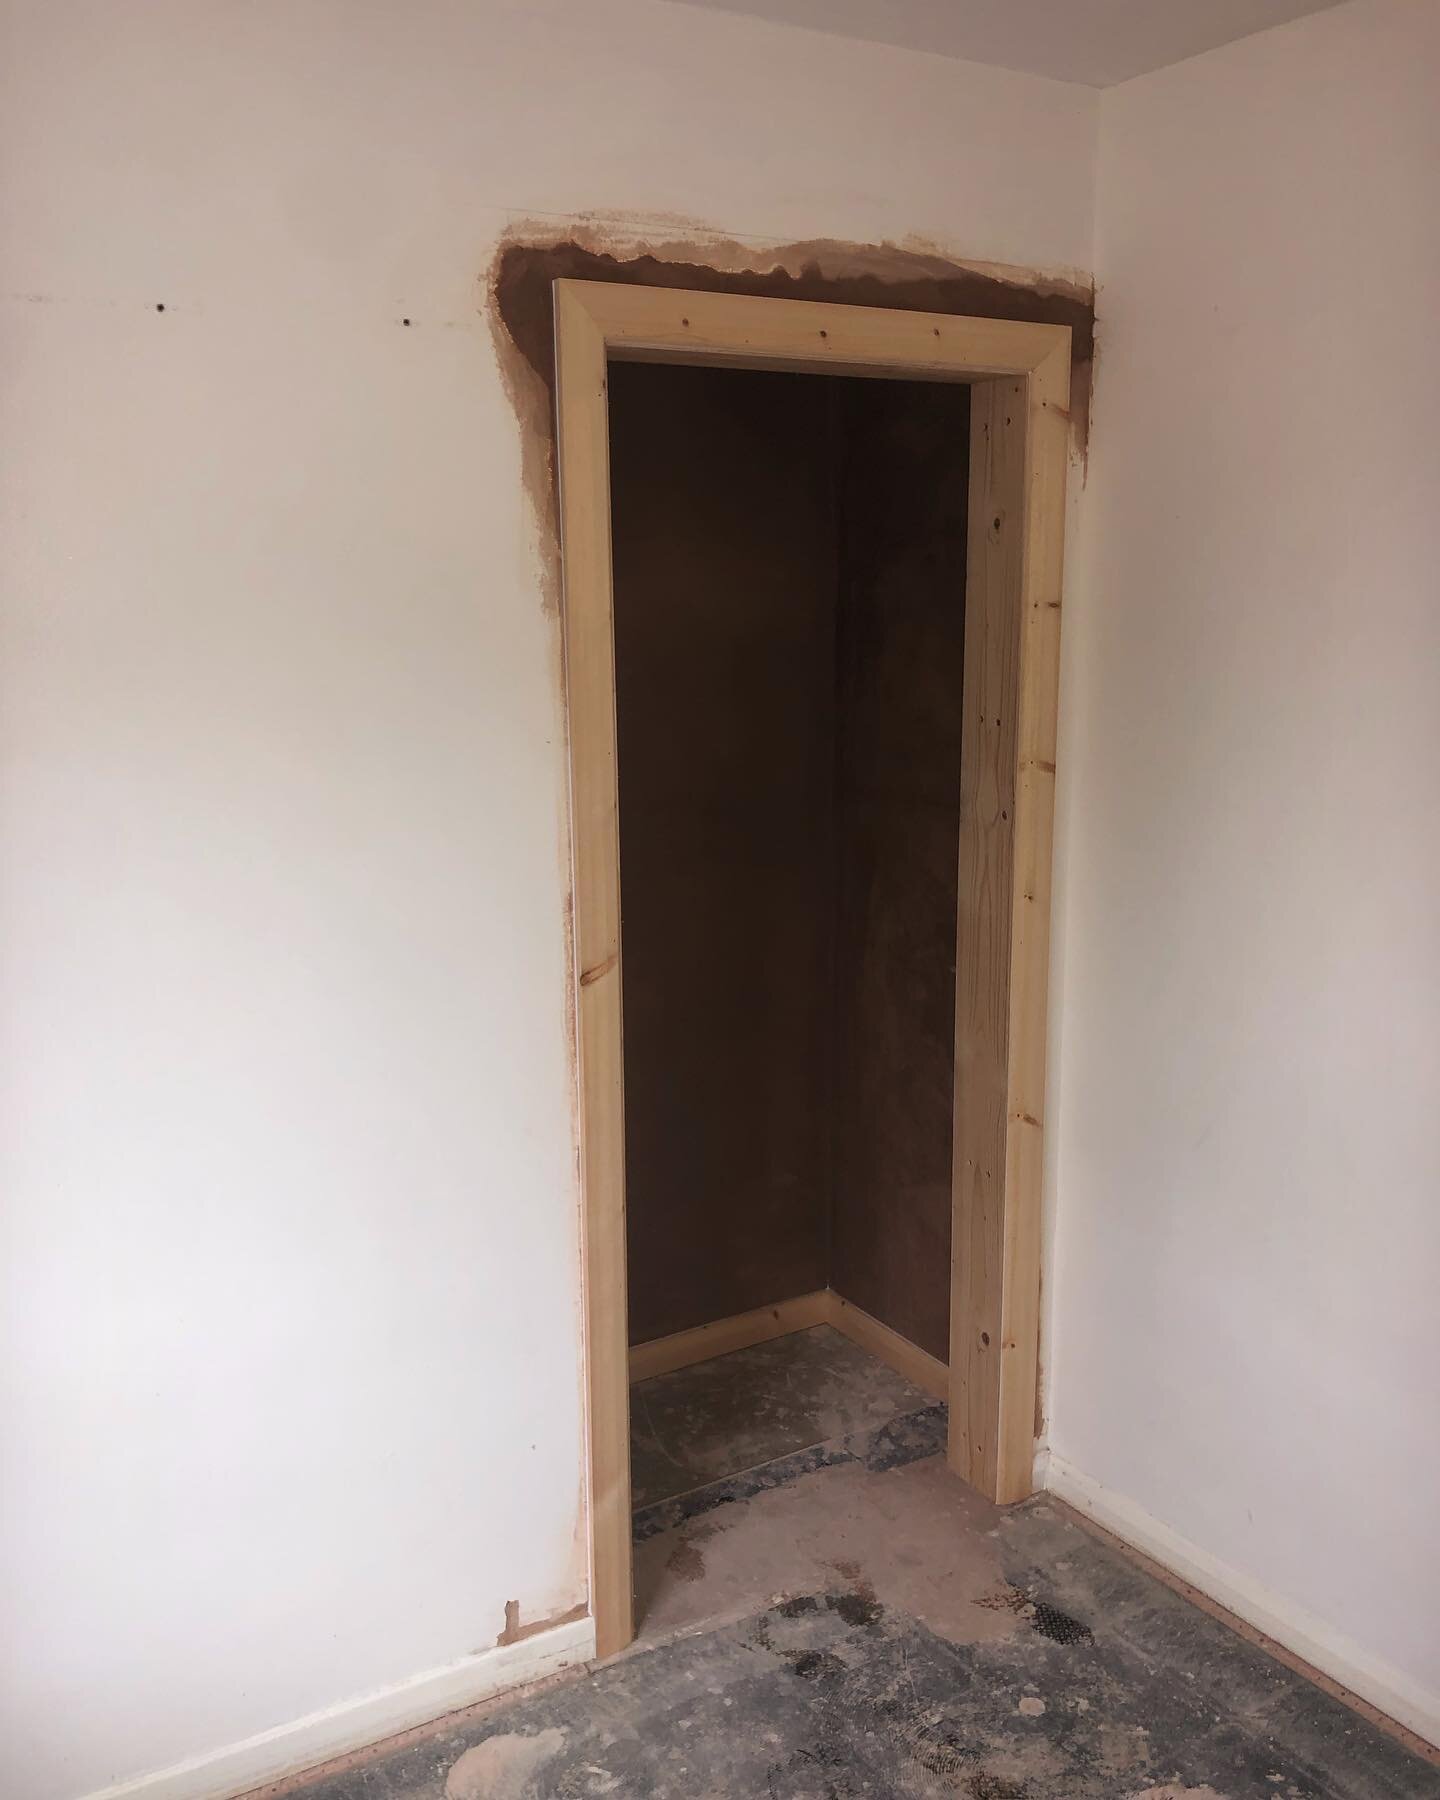 New wardrobe area built by knocking 🔨through this block wall.  Gives the smaller room some much needed storage space.#building #builder #carpenter #carpentry #wardrobe #builtinwardrobe #builtinstorage #storage #plastering #sandrcarpentry #woodwork #